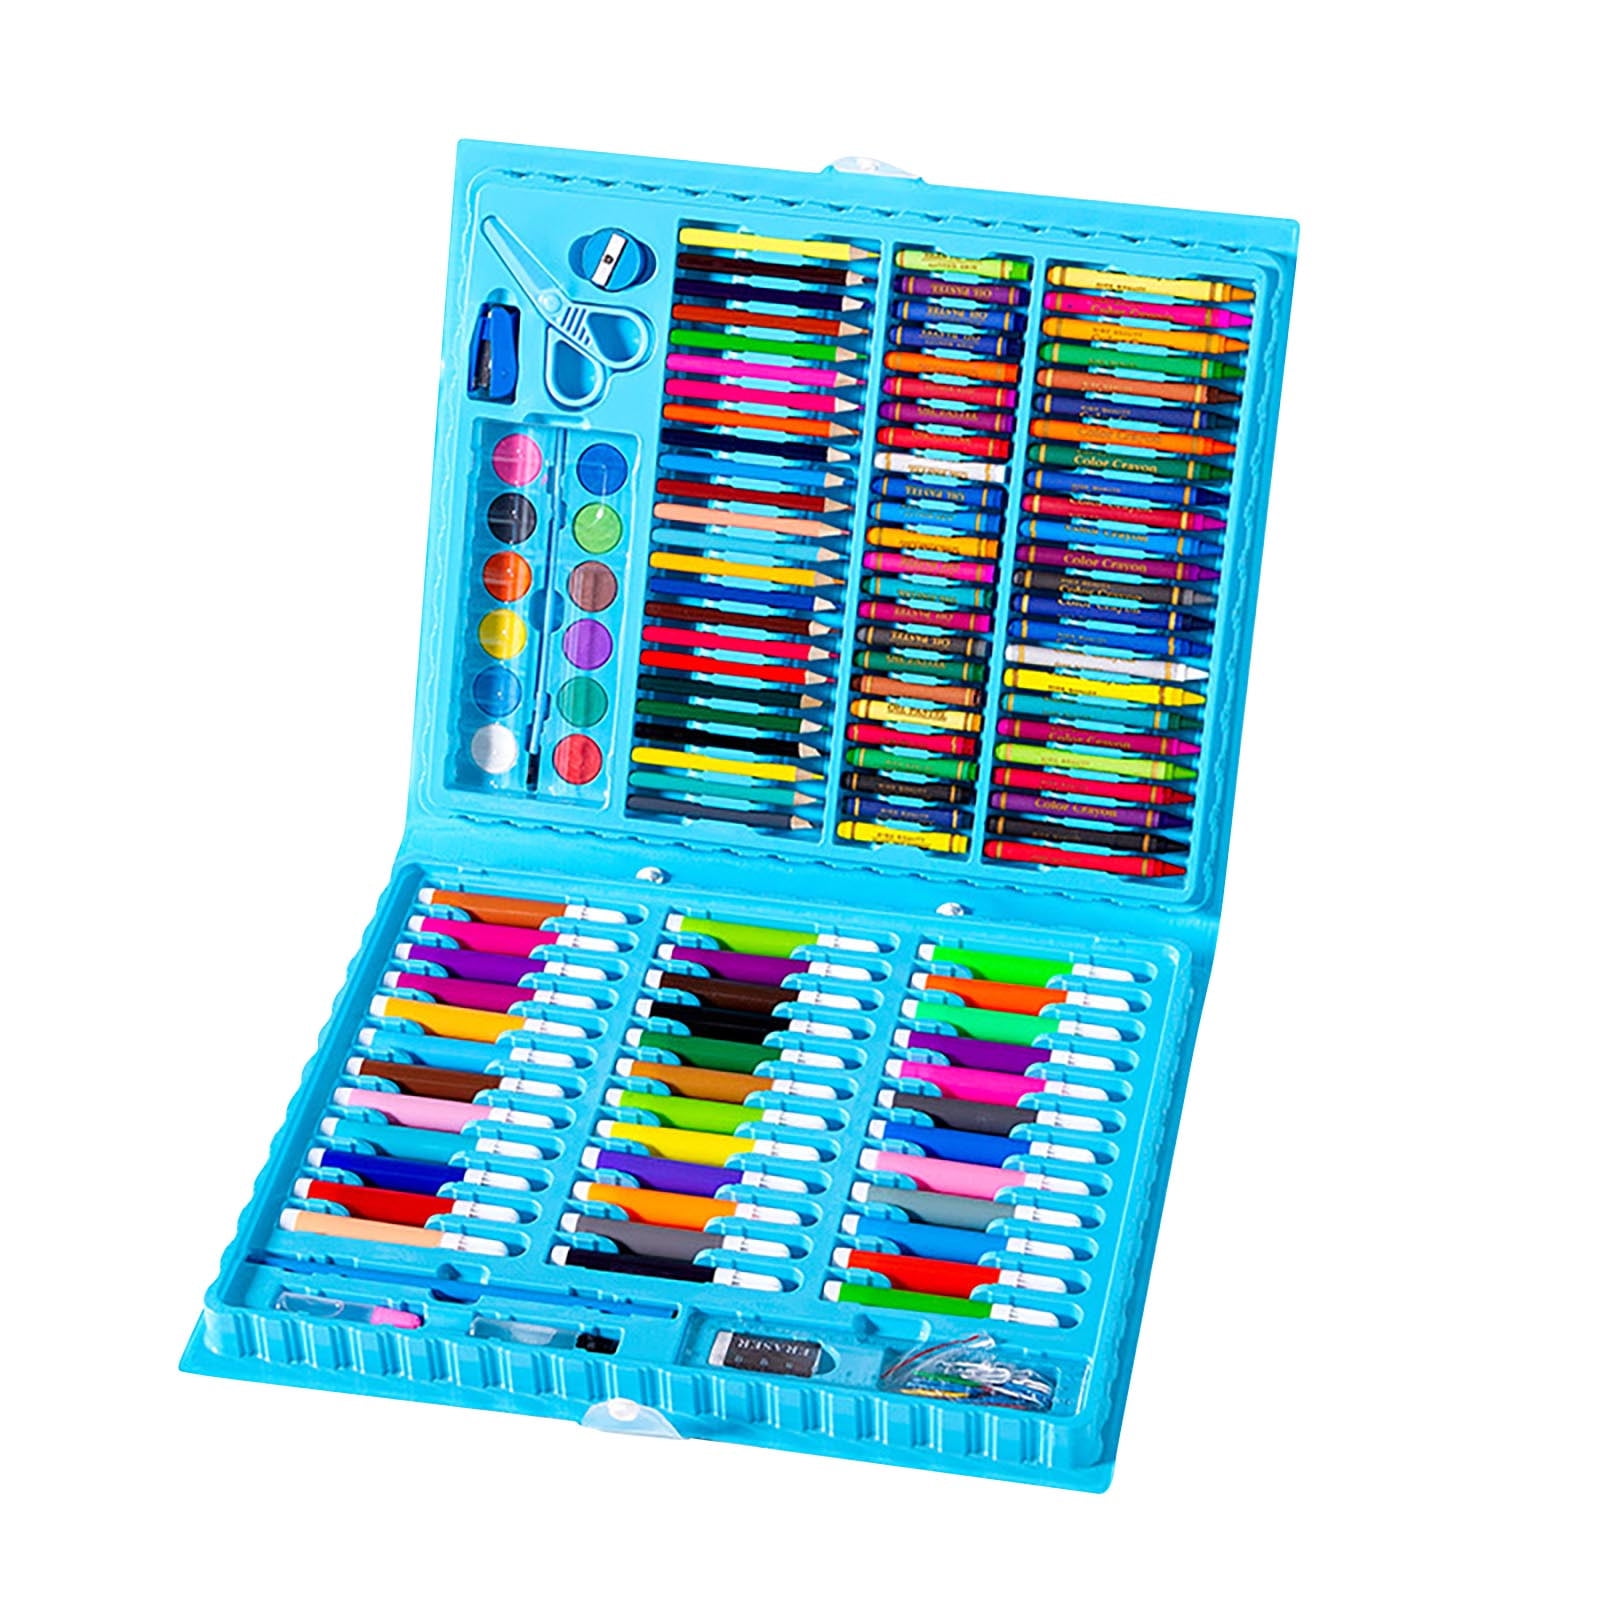  COHEALI 15pcs Pull Crayons Colored Pens for Kids